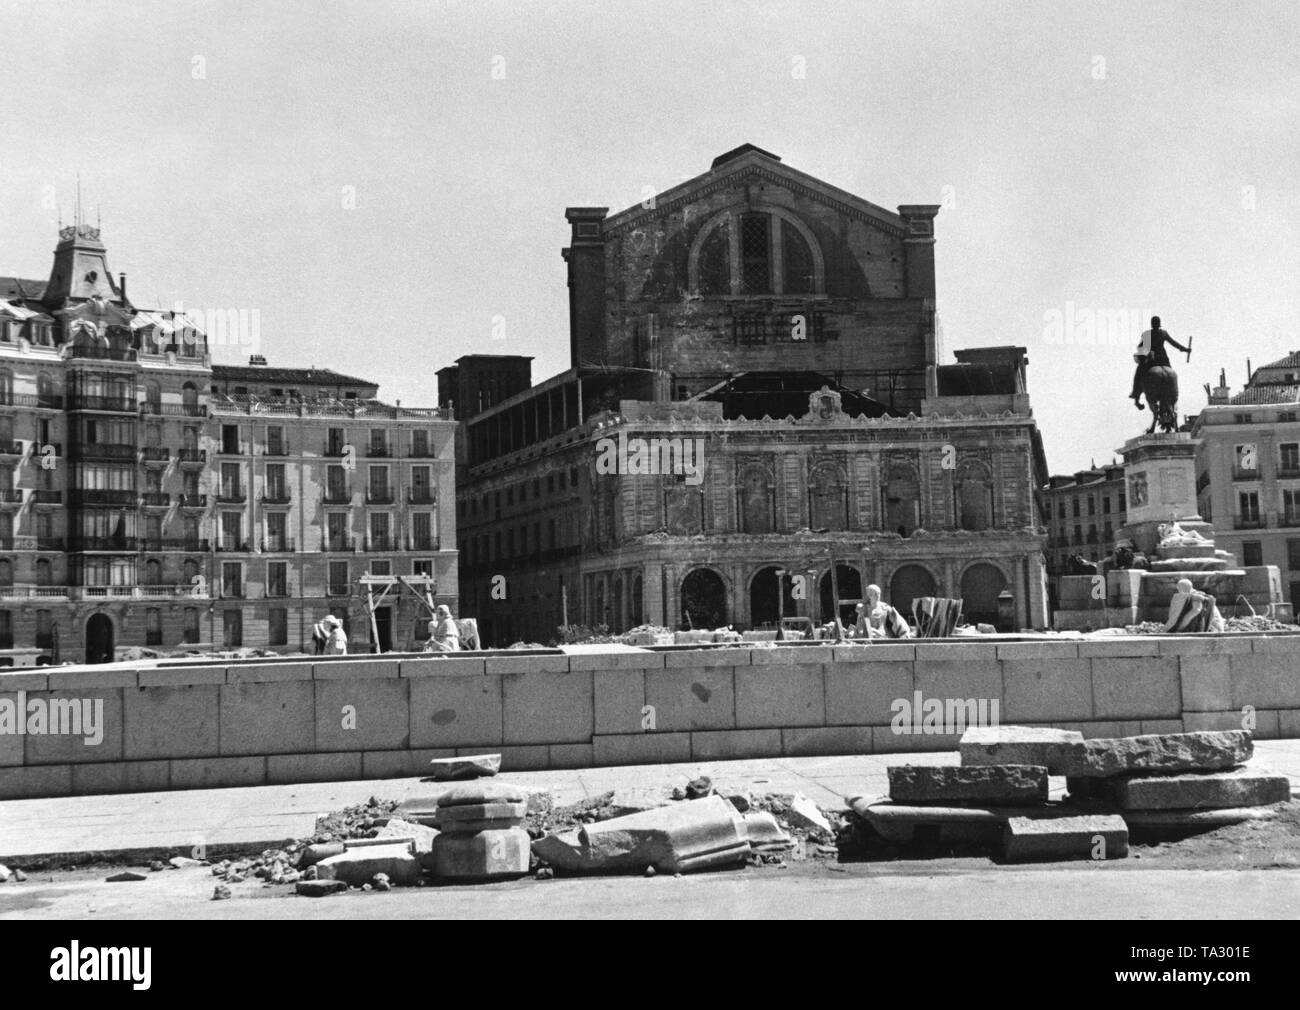 Photo of the Plaza del Oriente in Madrid after the invasion of the Spanish troops under General Francisco Franco in the spring of 1939. In the background, the partially destroyed Teatro Real opposite the Spanish Royal Palace (Palacio Real). The pavement of the square is torn open for barricade construction. Children are playing. Stock Photo